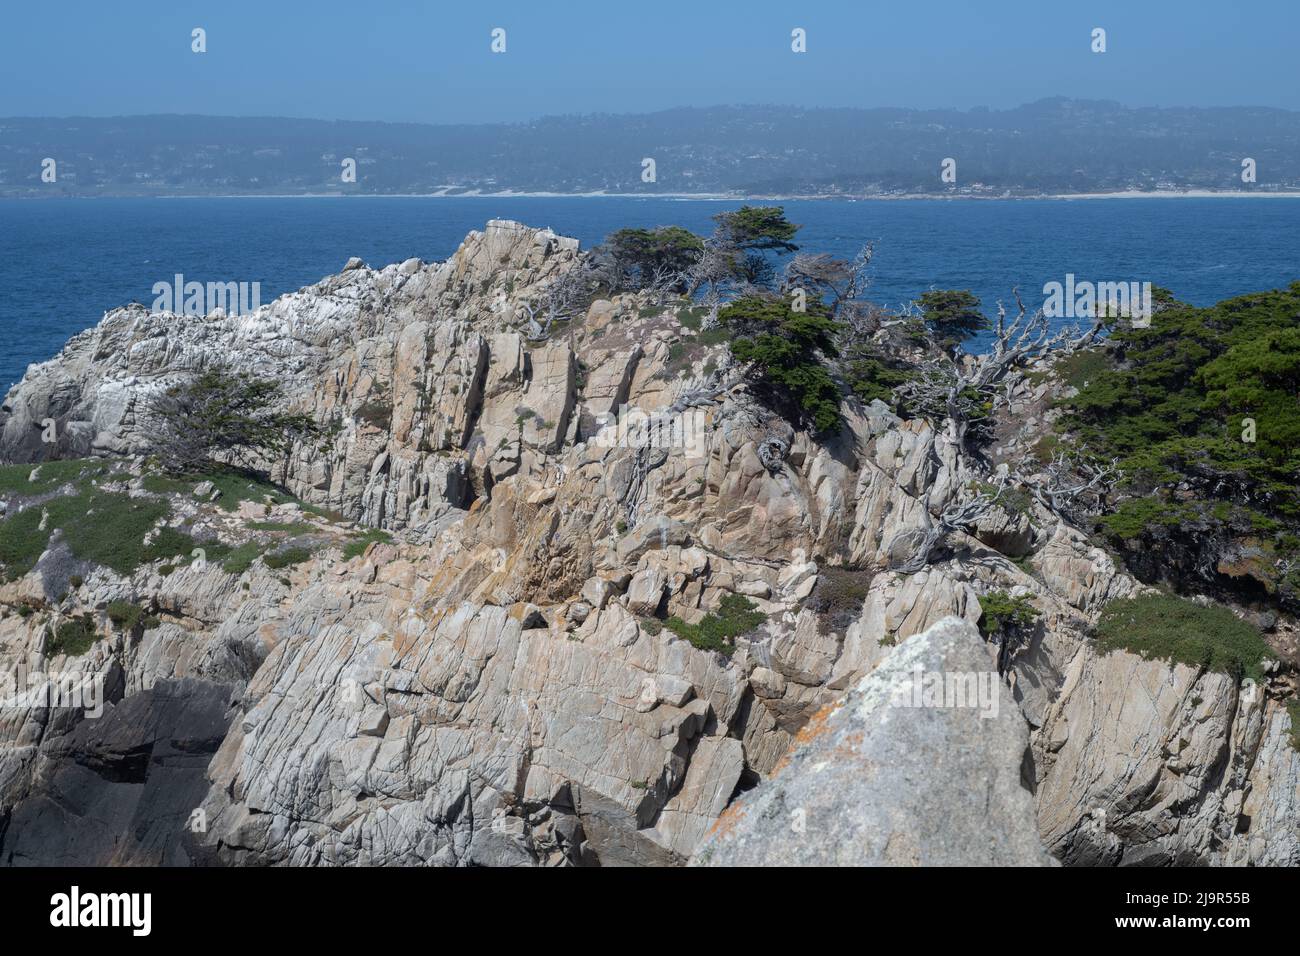 A rocky cliff covered with sparse vegetation and monterey cypress tree in Point Lobos state reserve overlooking monterey bay in California. Stock Photo